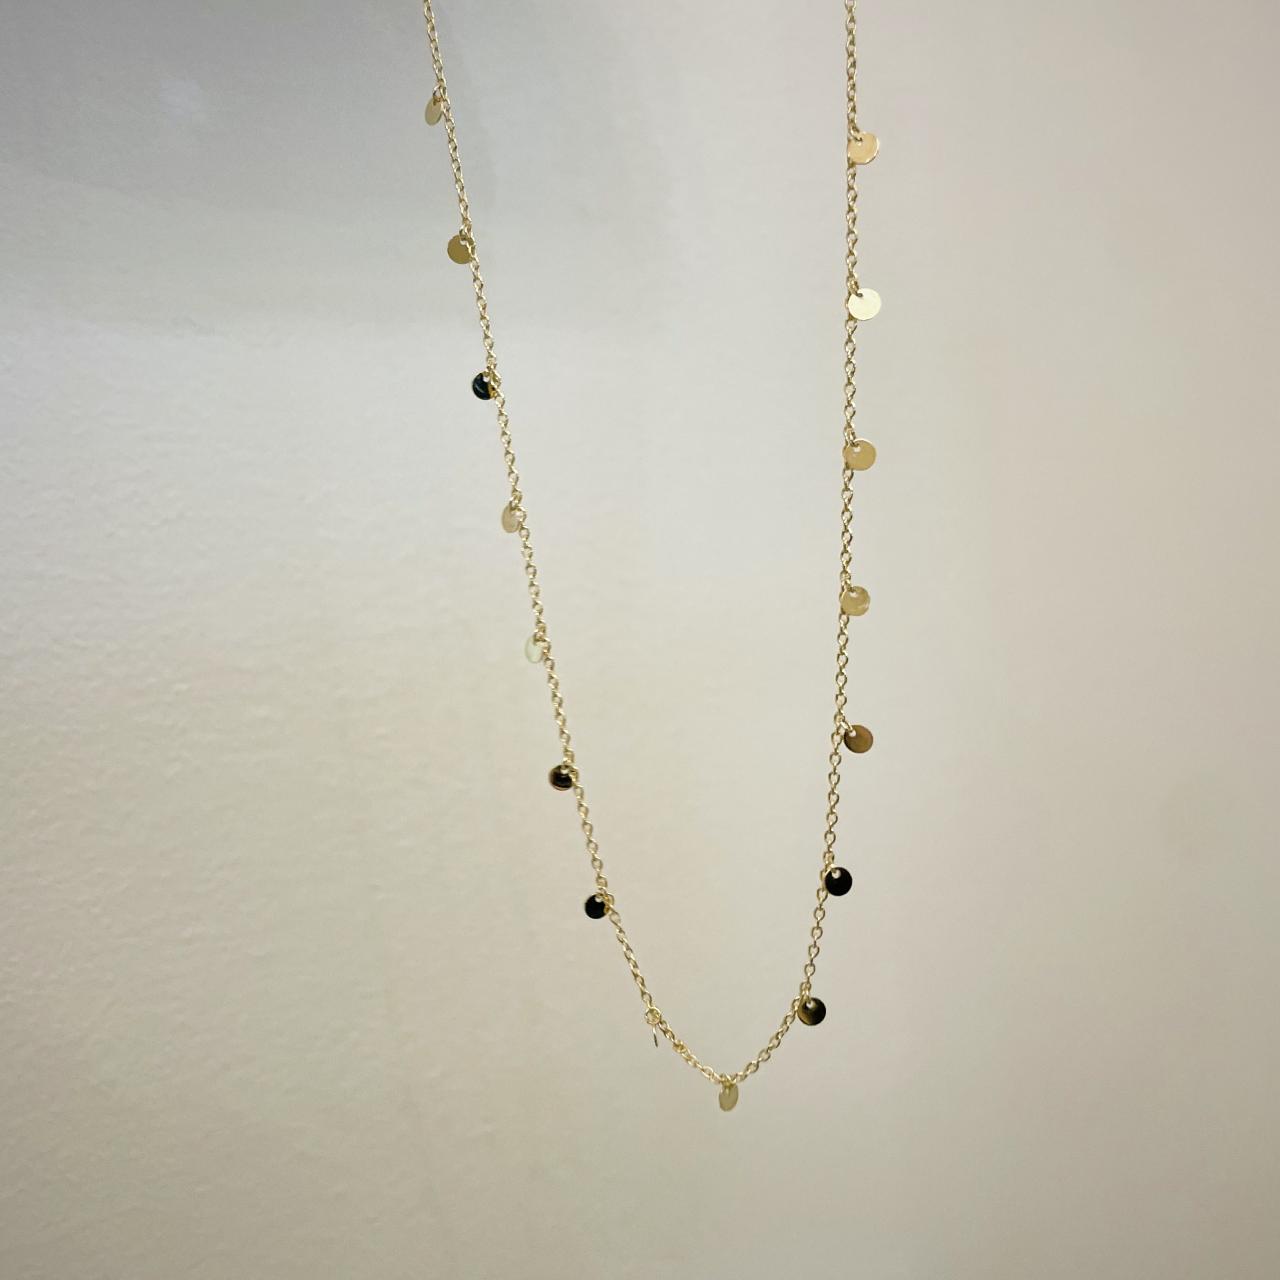 LD droplet necklace in Yellow